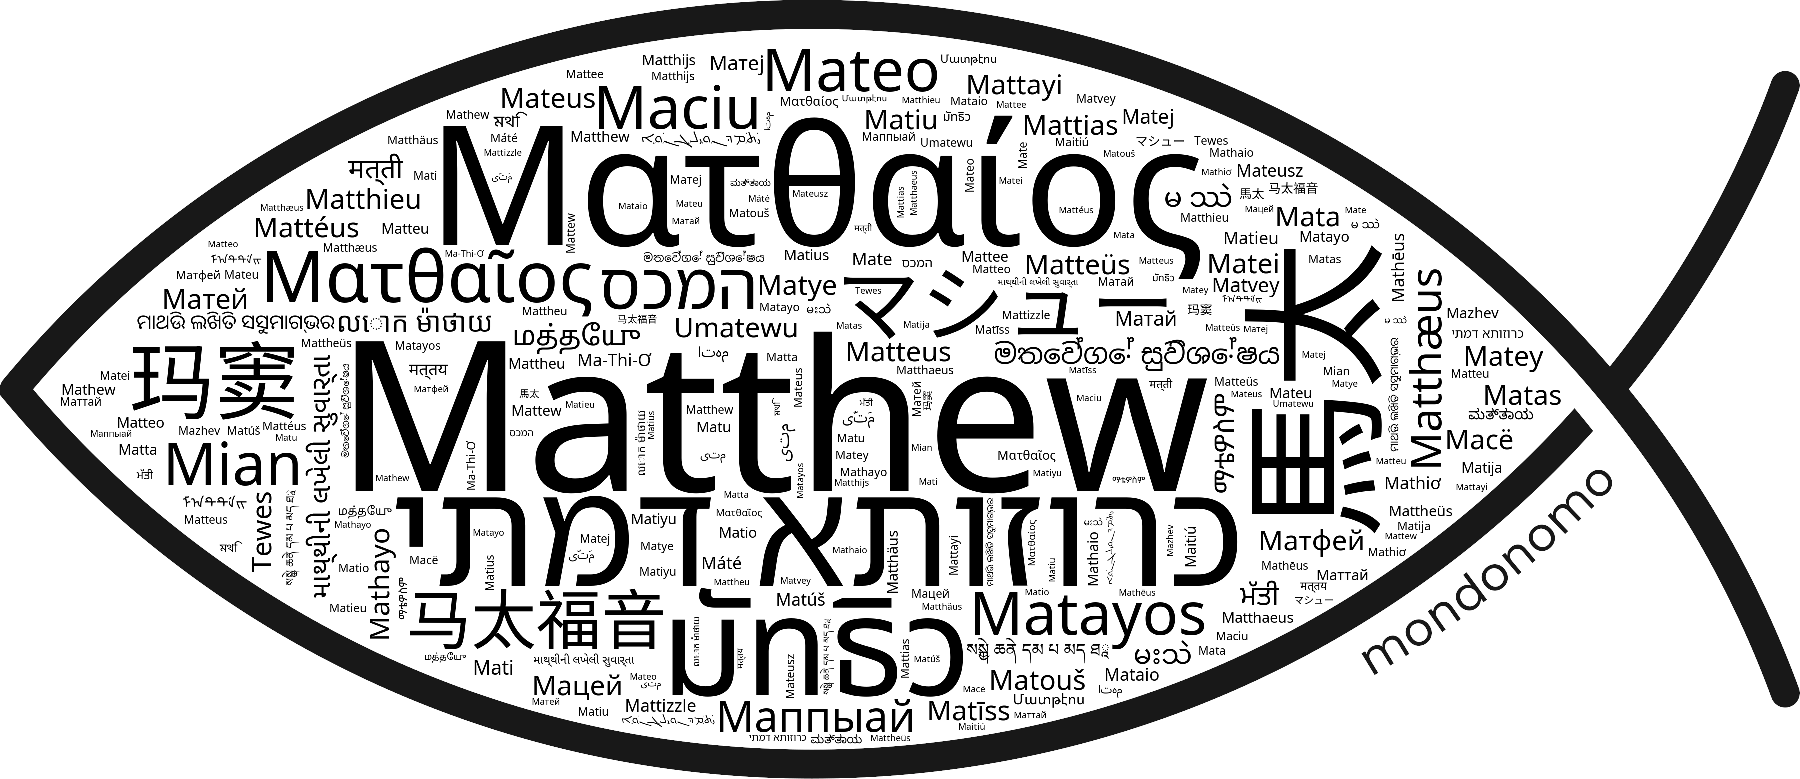 Name Matthew in the world's Bibles